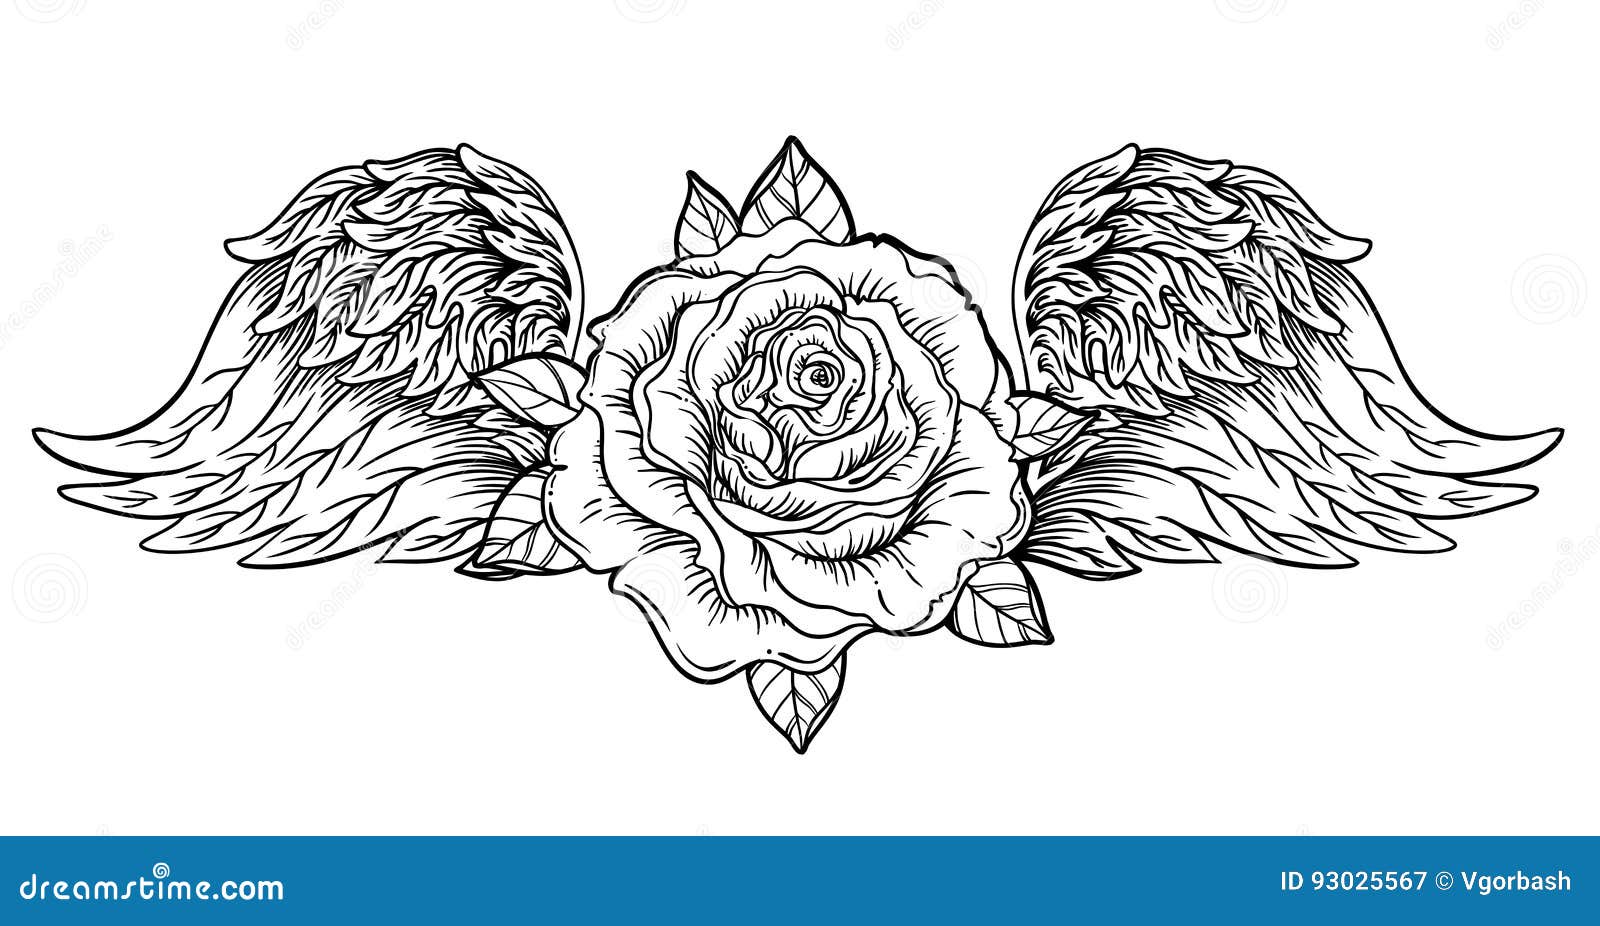 Realistic Black Angel Wings Rose Flower Temporary Tattoos For Women Adults  Fake Tatoos Fashion Tiger Floral Tatoos Death Skull  Temporary Tattoos   AliExpress